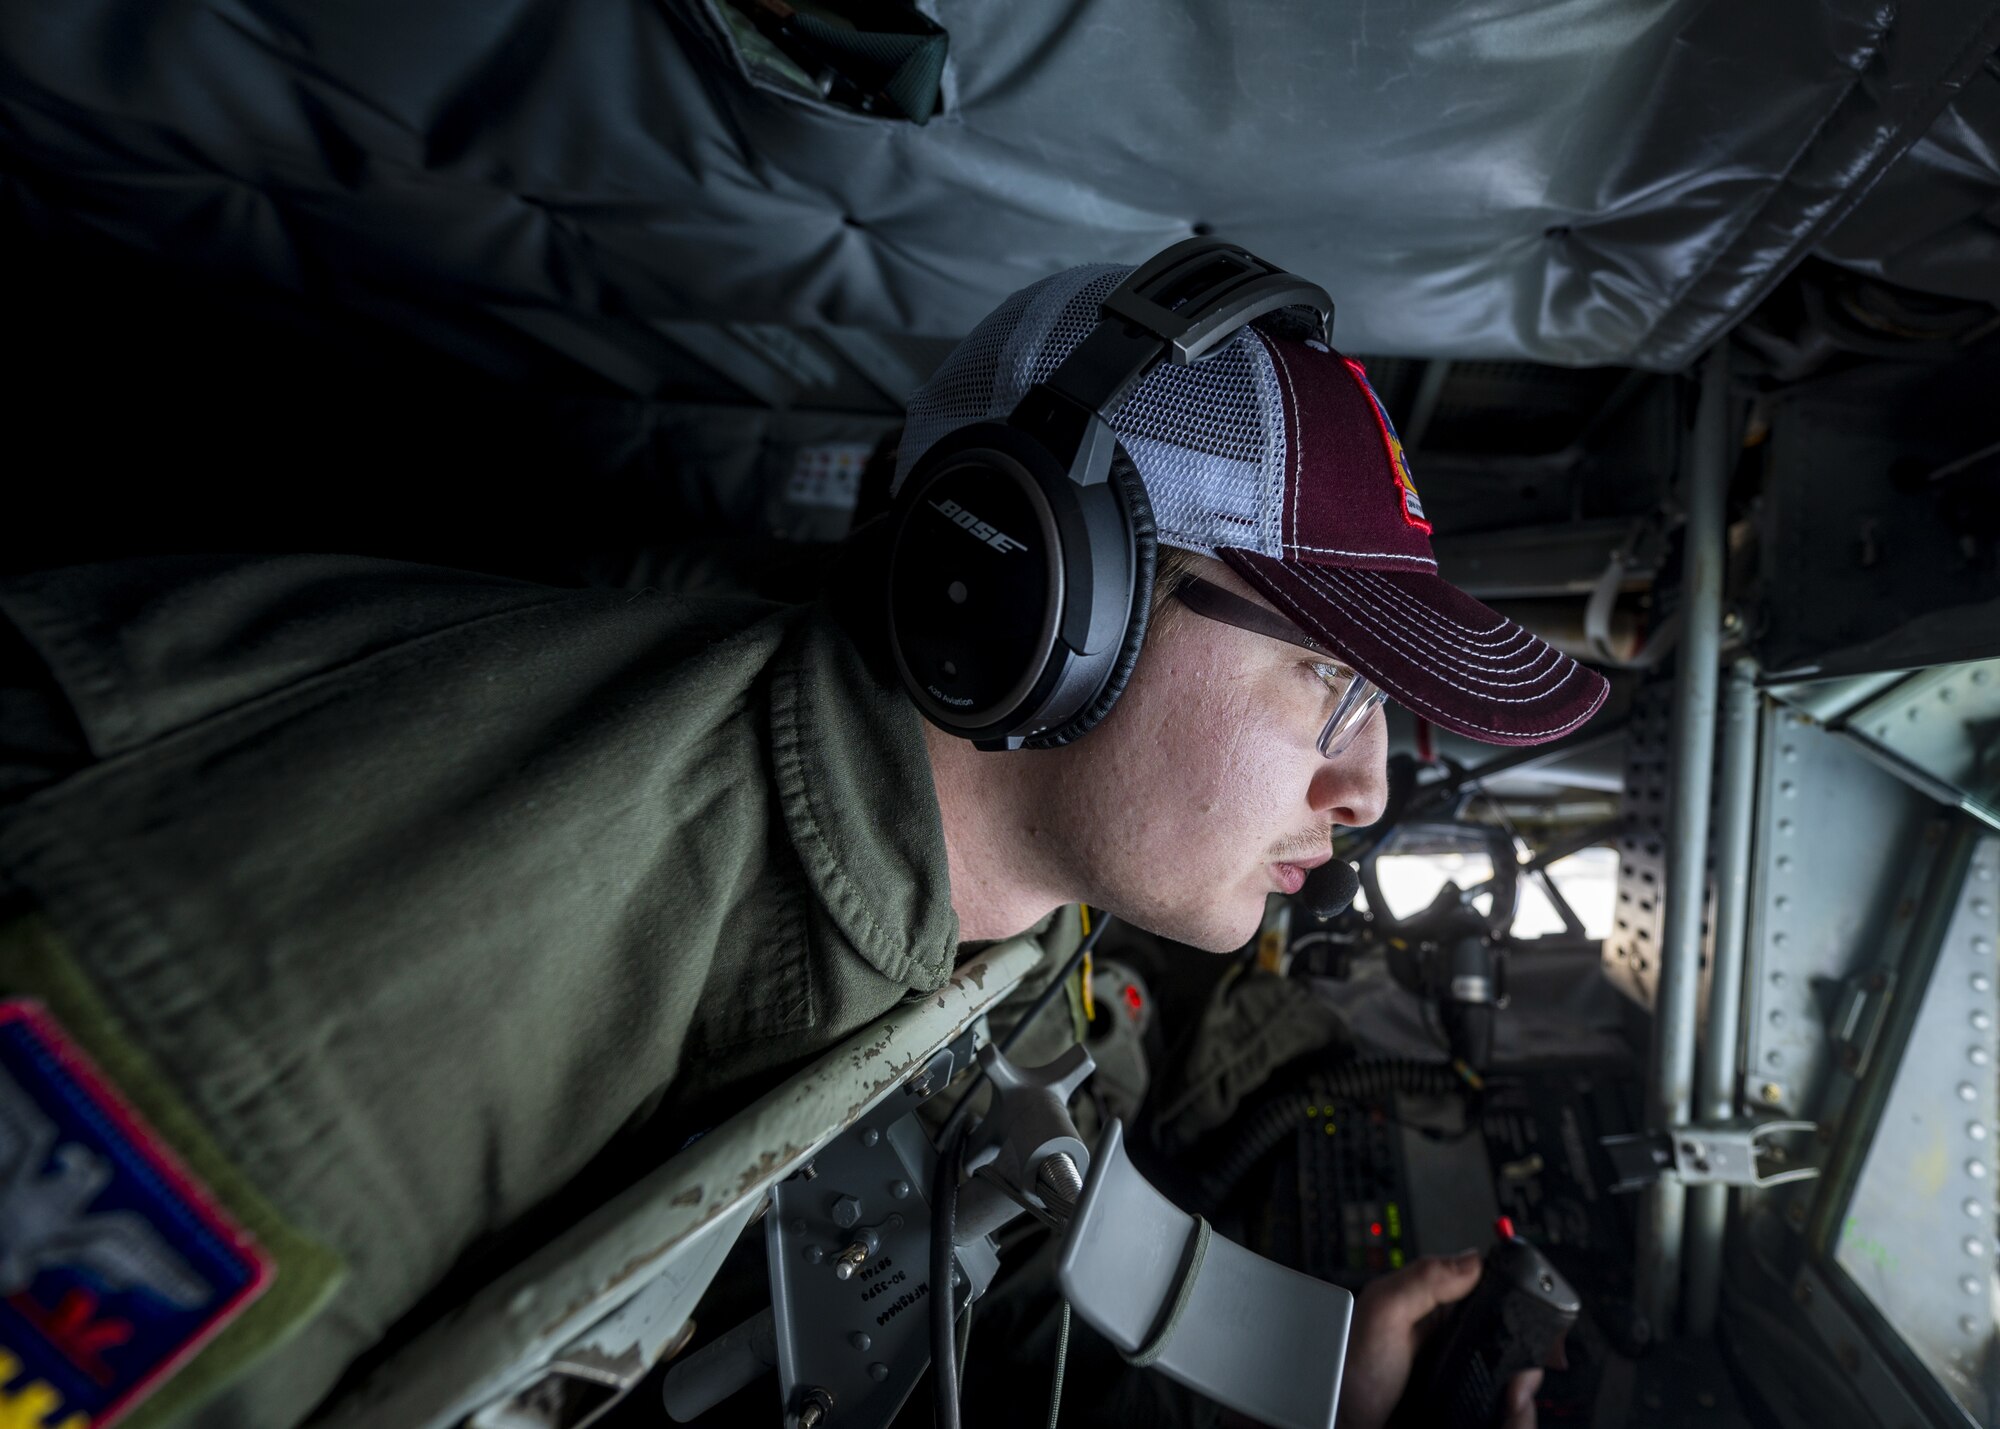 U.S. Air Force Airman 1st Class Aidan Ruehr, 384th Air Refueling Squadron boom operator, prepares to refuel U.S. Marine Corps F/A-18C Hornets during an air refueling coronet mission over the Pacific, March 9, 2023. Aircrew from the 384th Air Refueling Squadron conducted an air refueling coronet with Marines from the Marine Fighter Attack Squadron 312, demonstrating the critical role mobility forces have in projecting the joint force anywhere, anytime. (U.S. Air Force photo by Staff Sgt. Lawrence Sena)